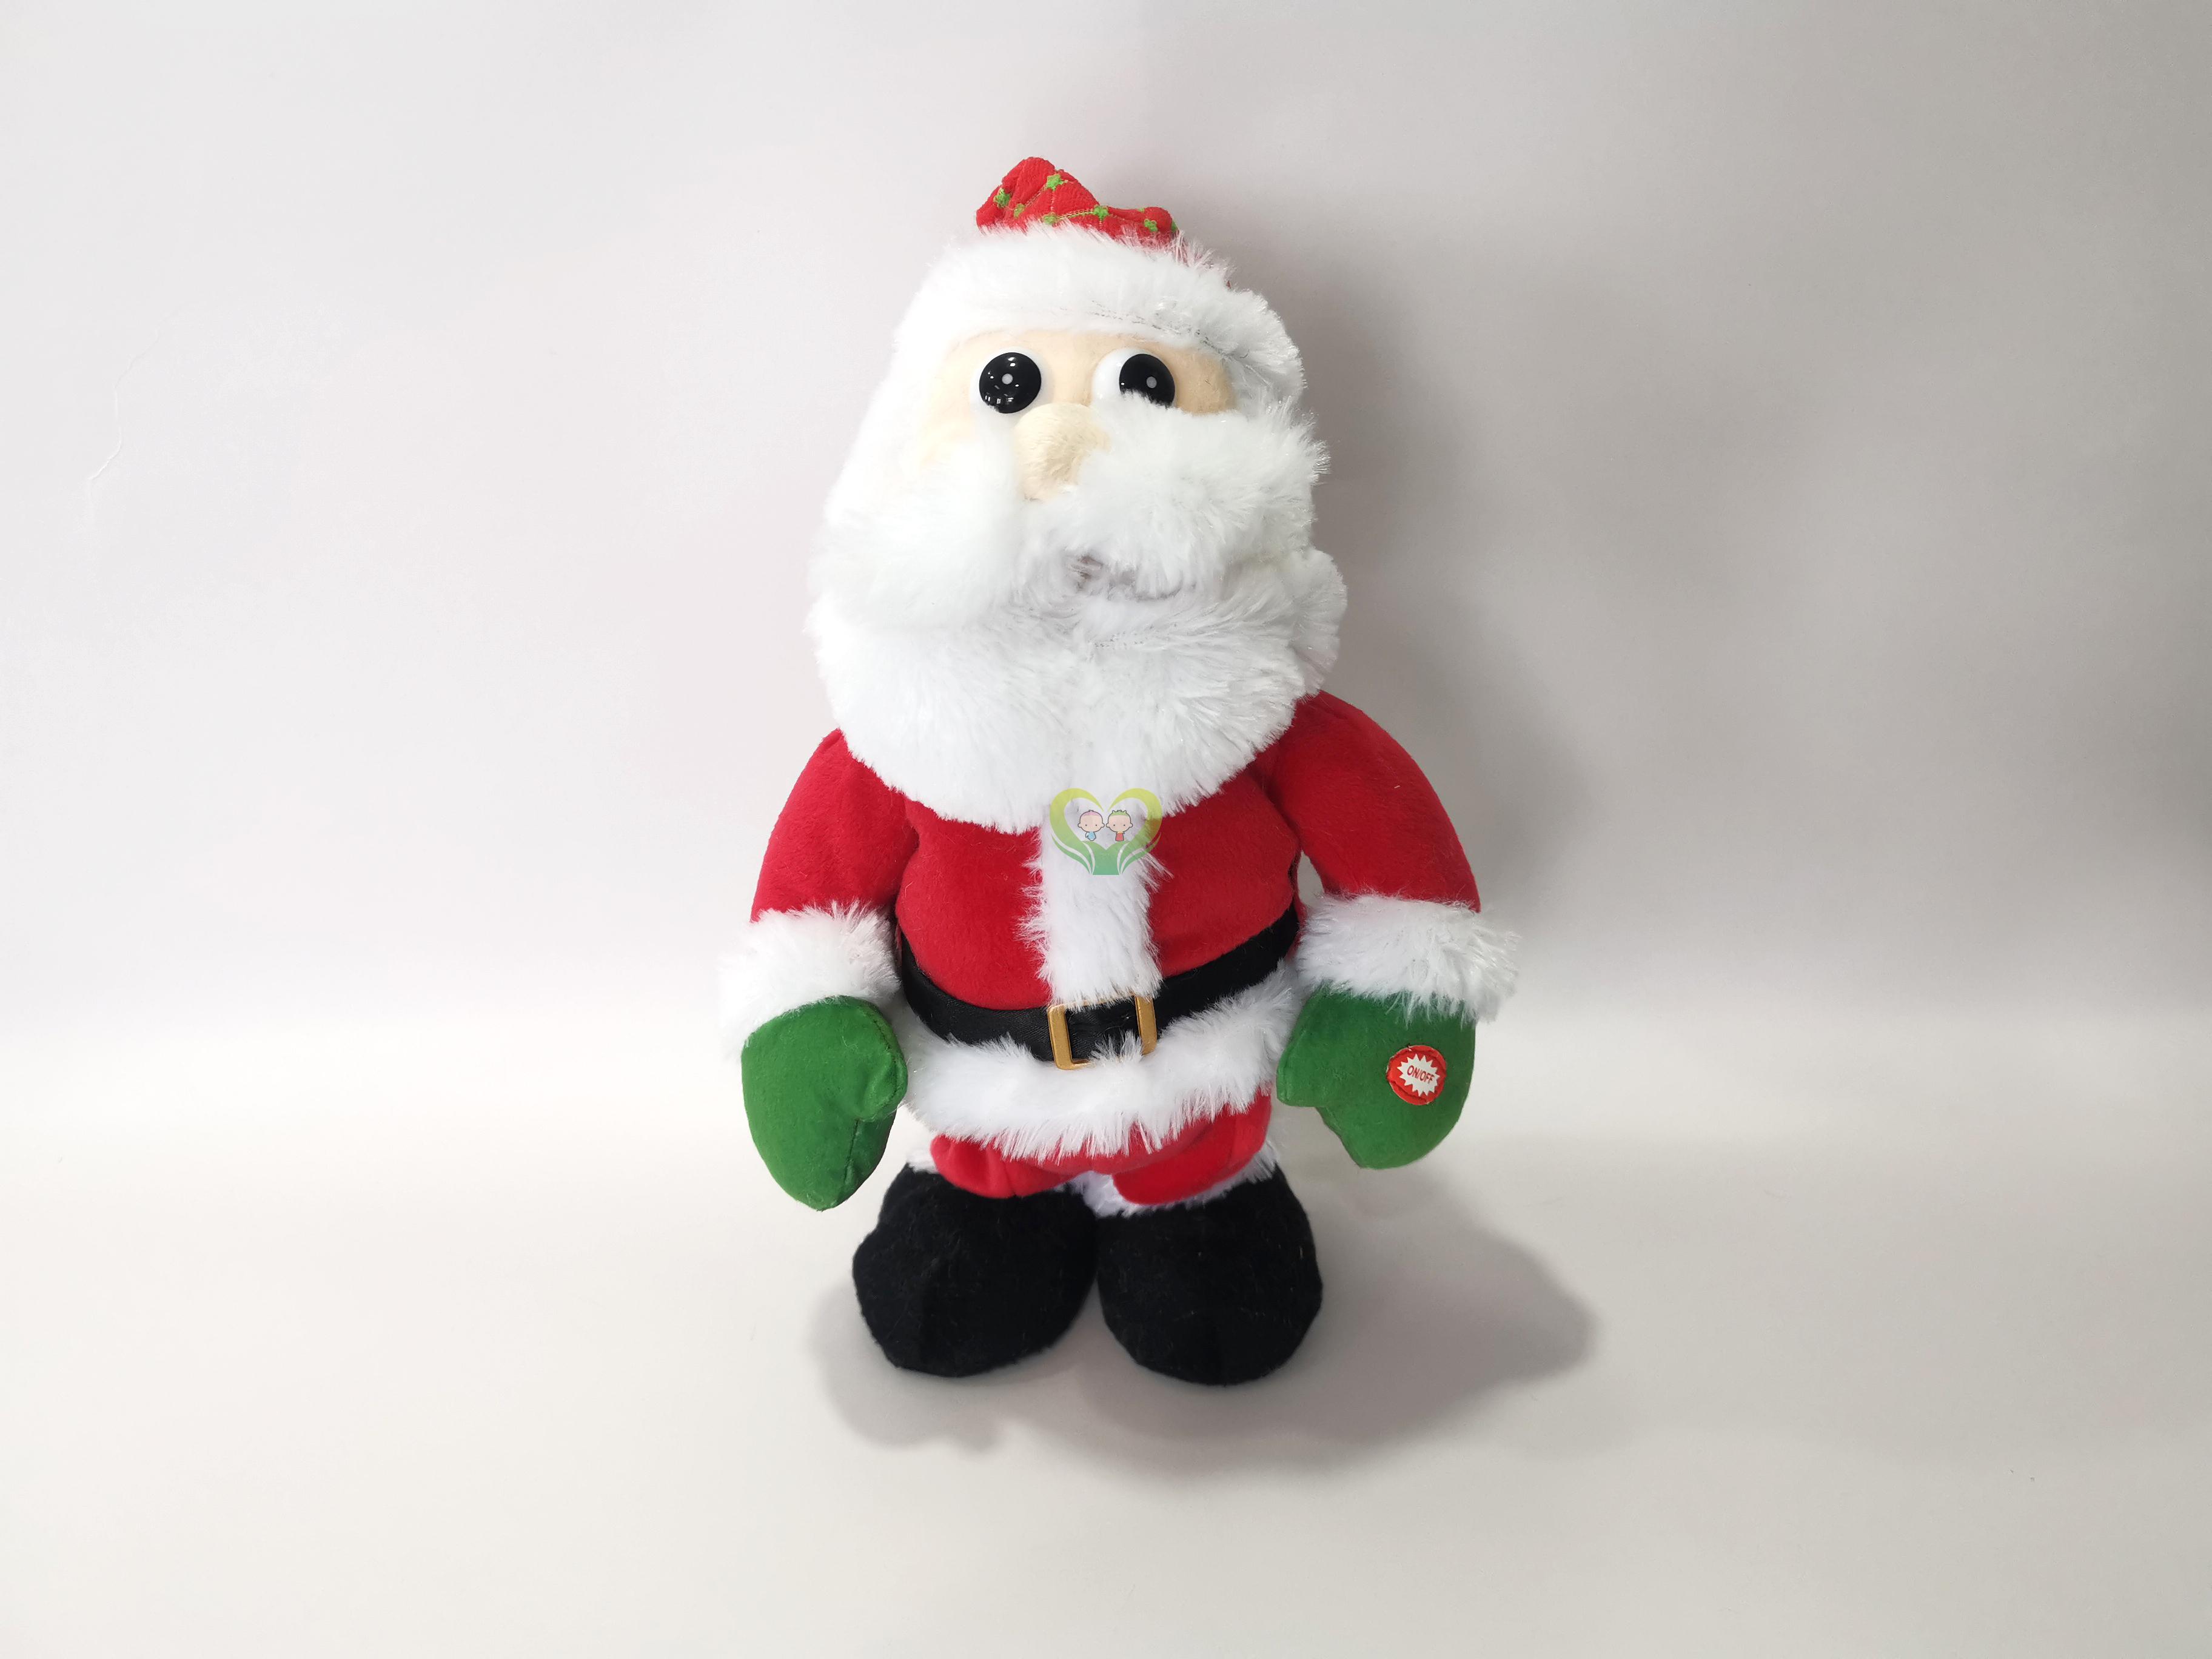 2018 Christmas Electronic plush toy: Santa Claus with Music